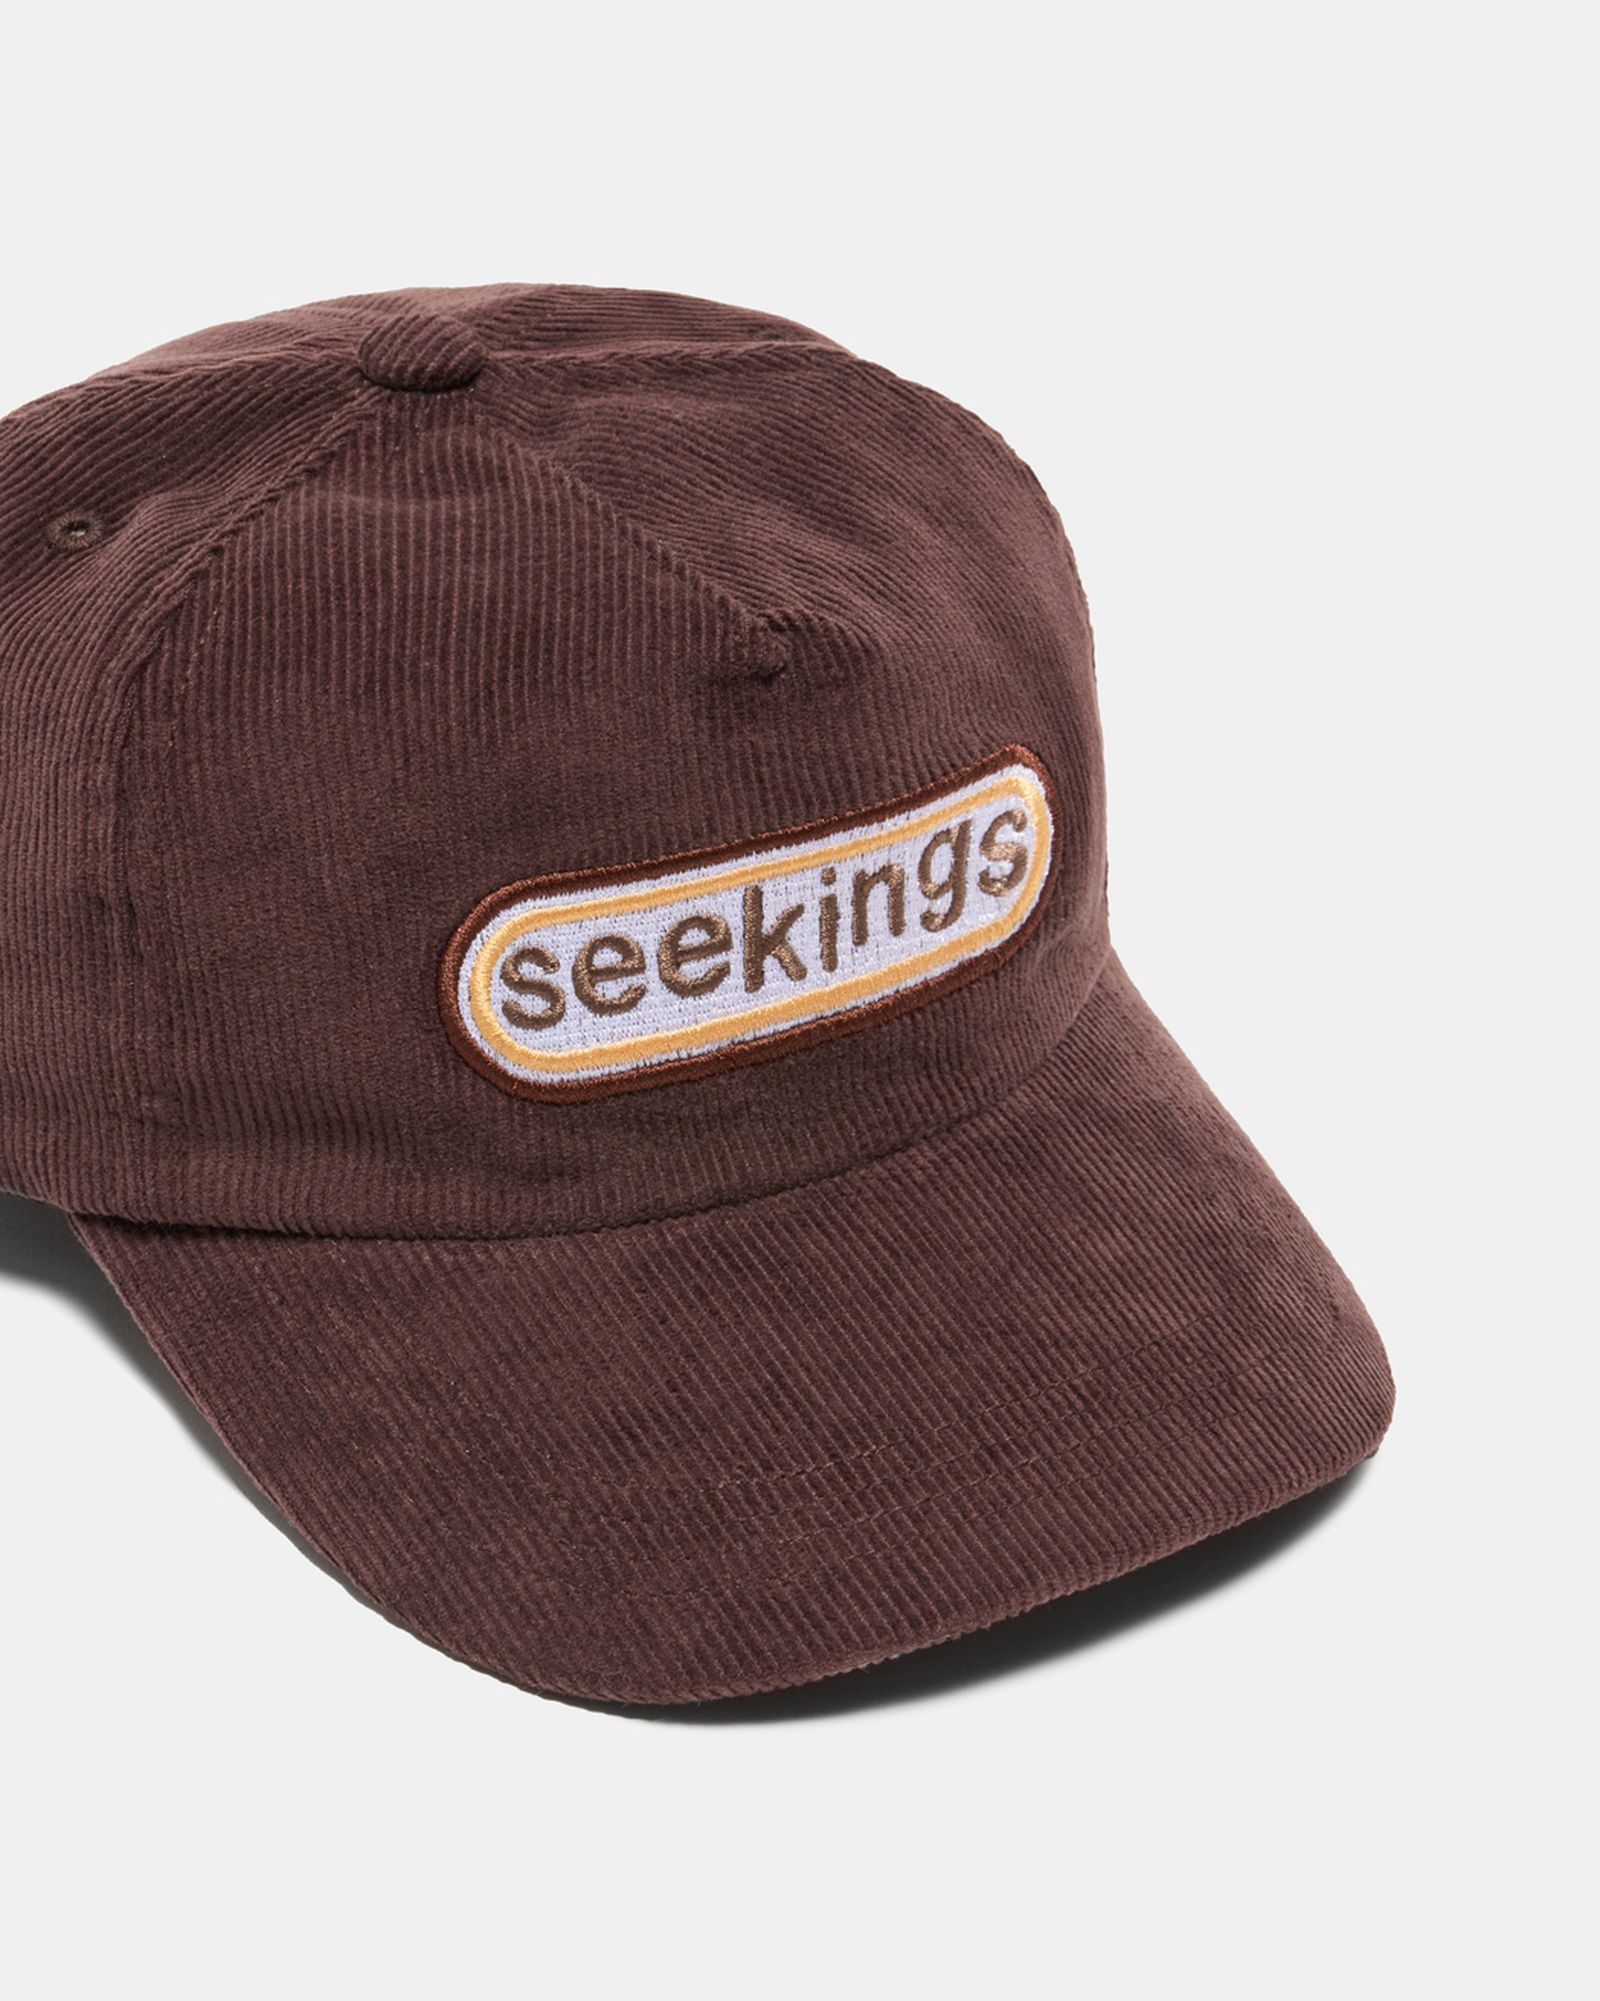 seekings-clothing-second-collection-release-price (4)